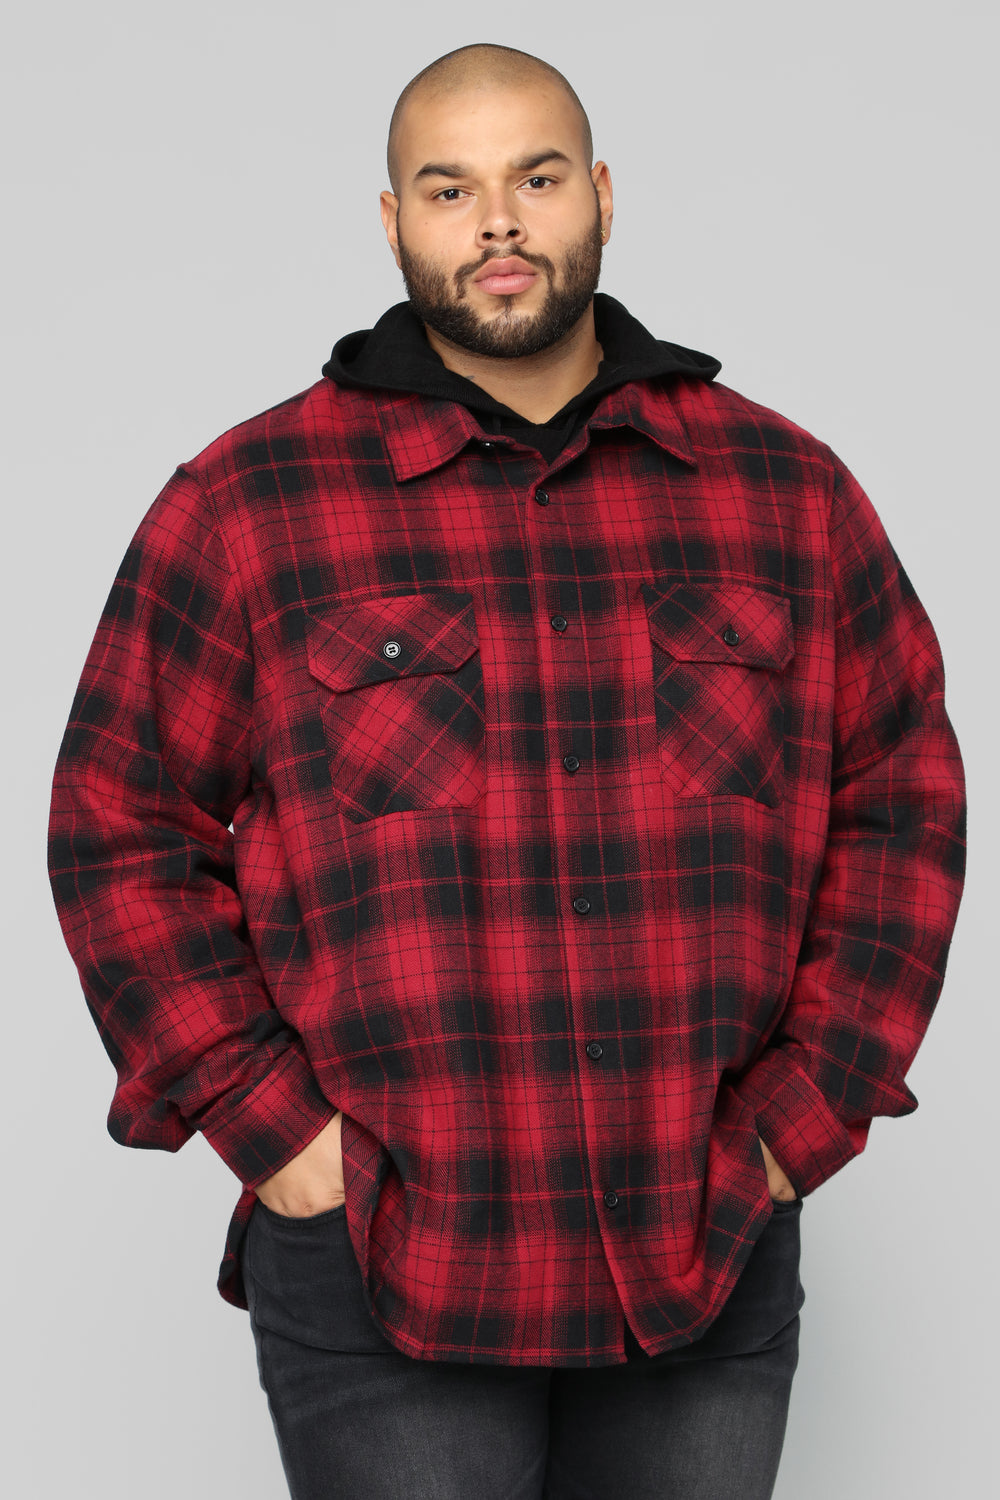 Kane's Long Sleeve Flannel Top - Red/Black